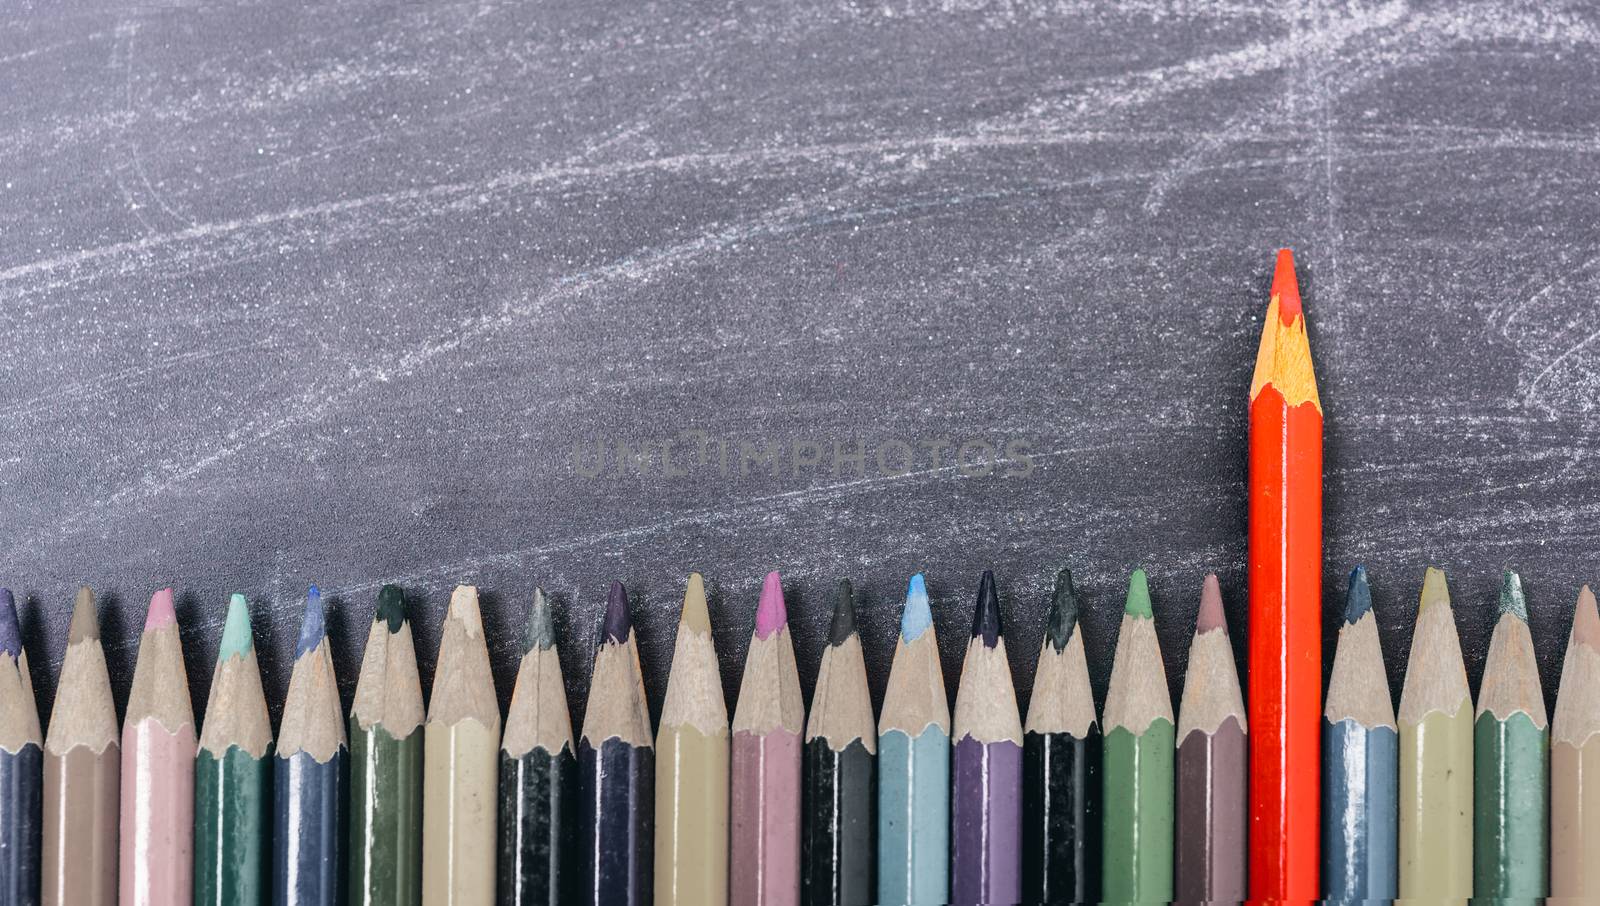 Red pencils color standing out from the crowd by Sorapop